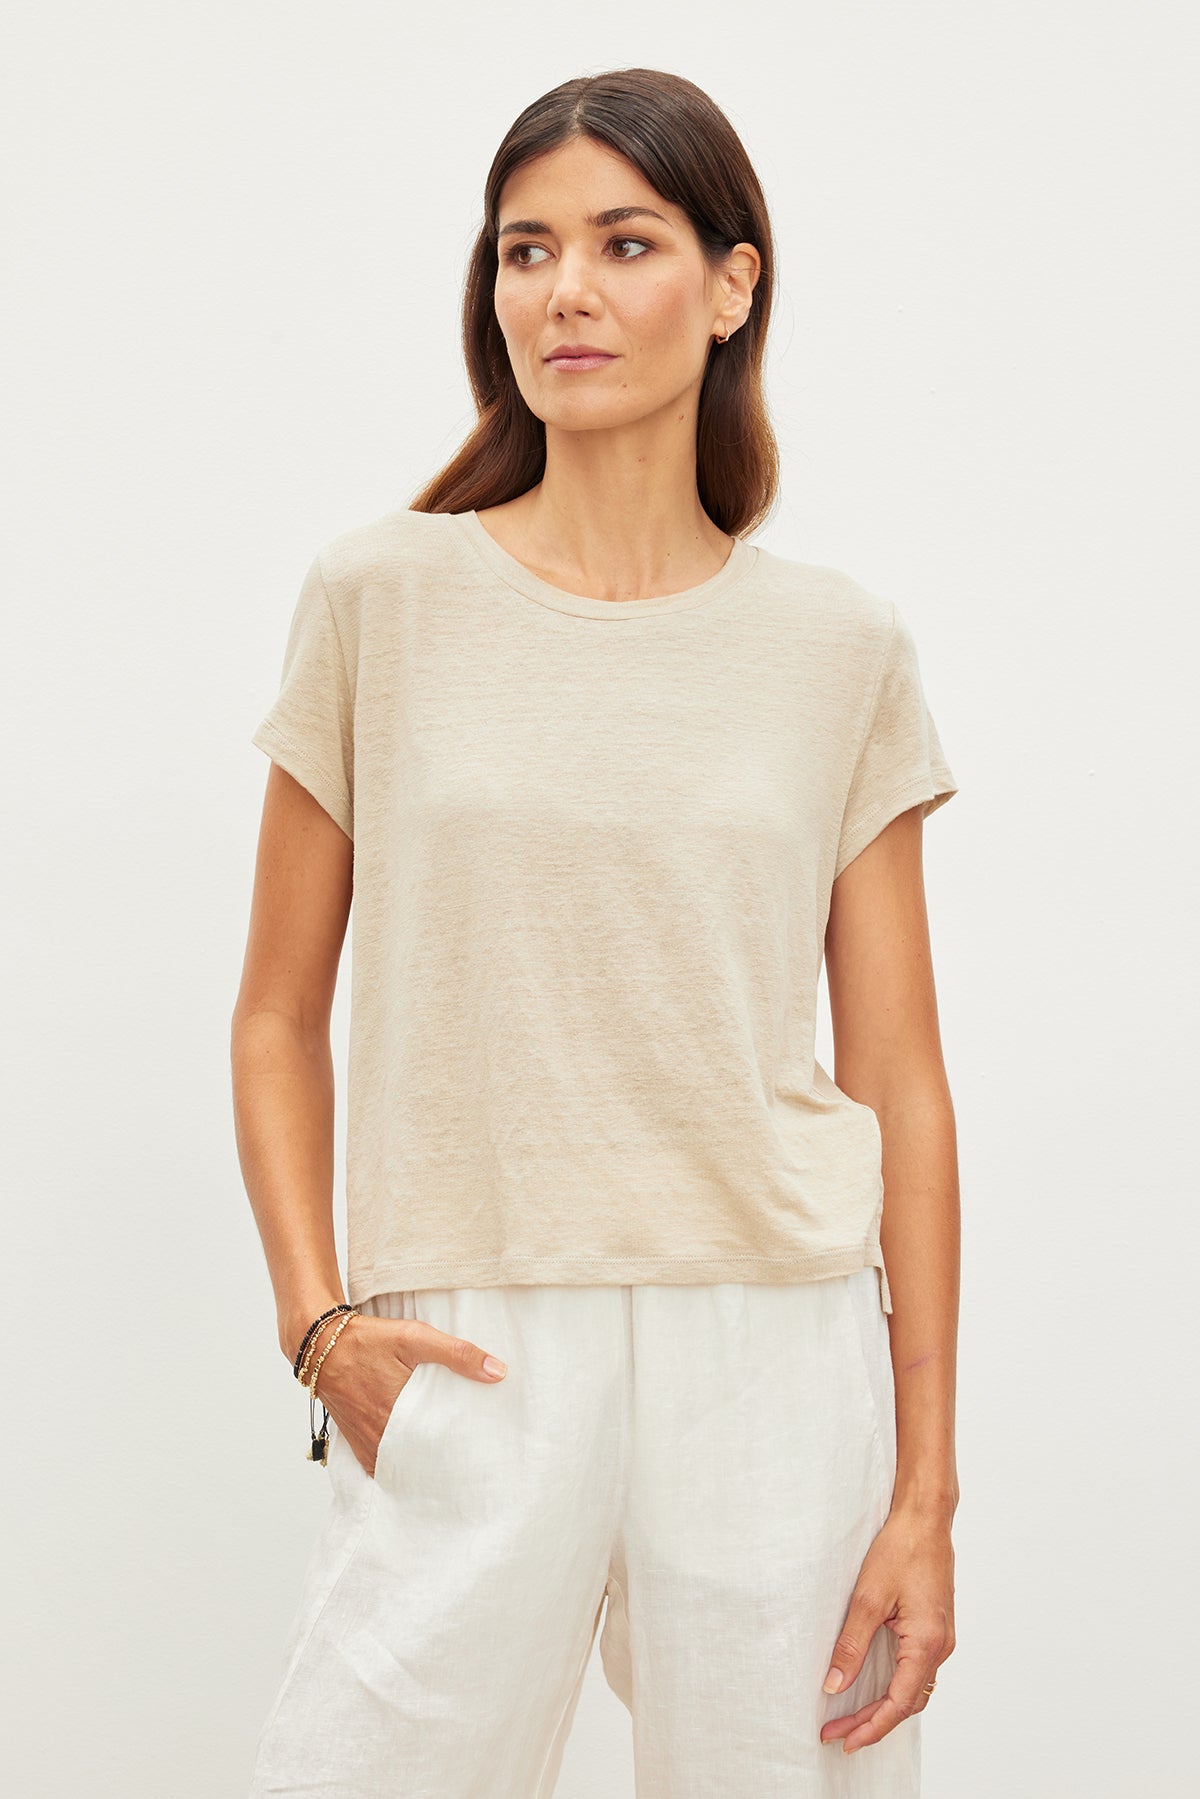 The model is wearing a Velvet by Graham & Spencer beige linen tee and white pants.-35955505987777